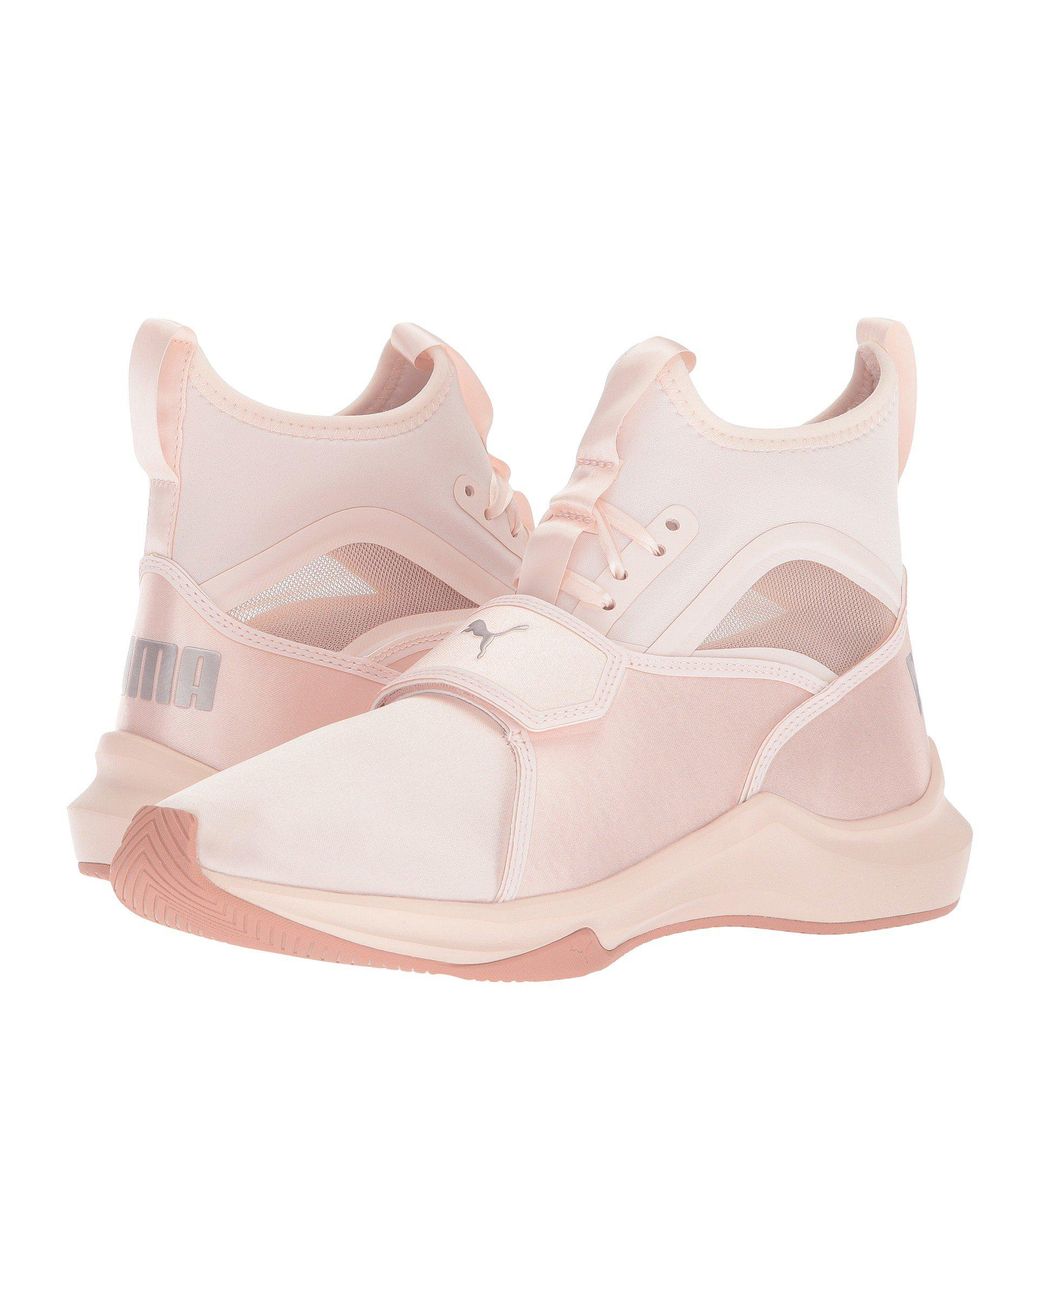 Satin Ep (pearl/pearl) Women's Shoes Pink | Lyst